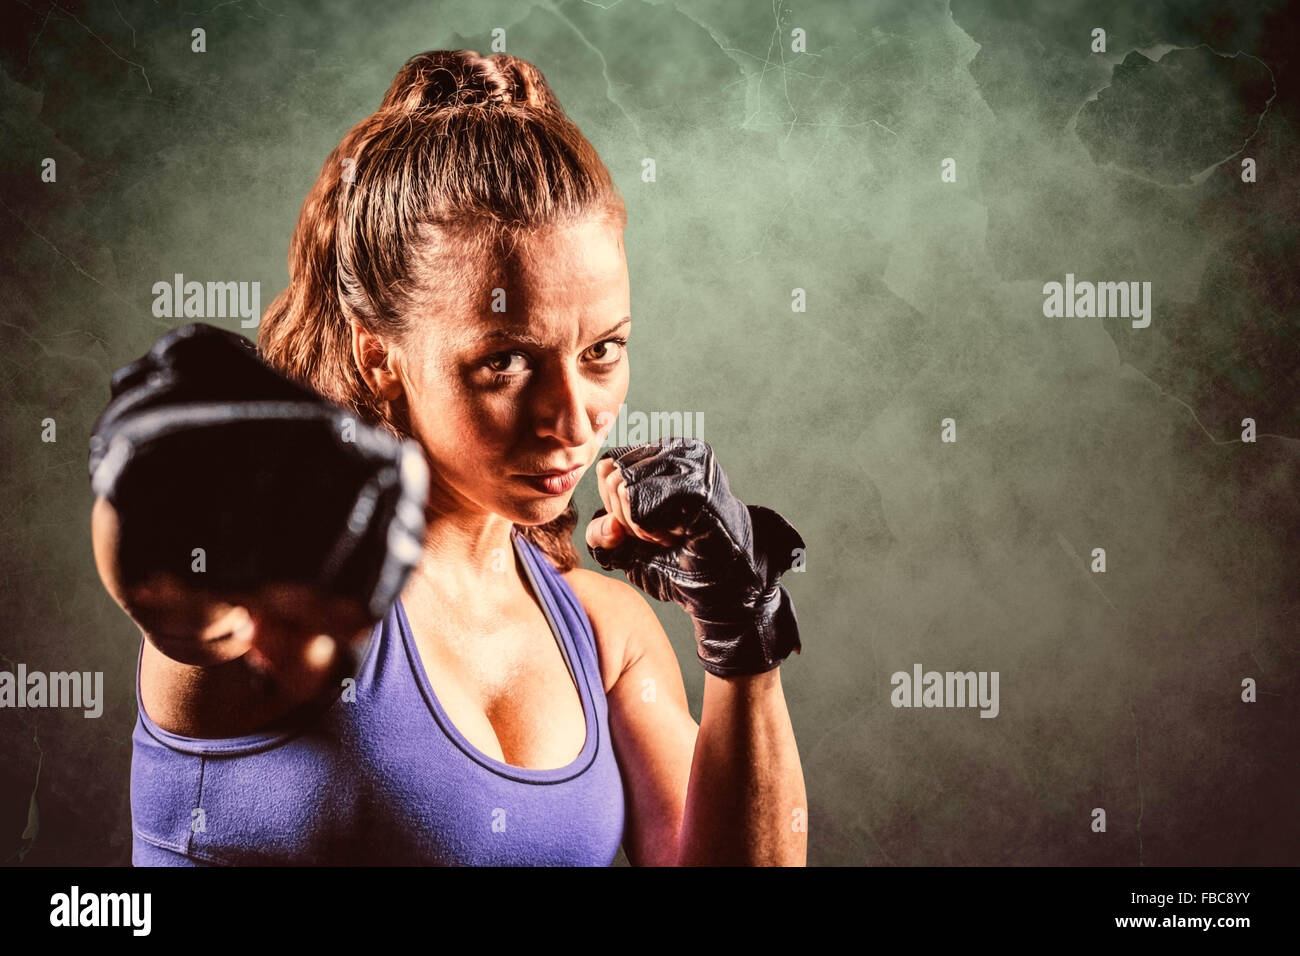 Composite image of portrait of female fighter punching Stock Photo